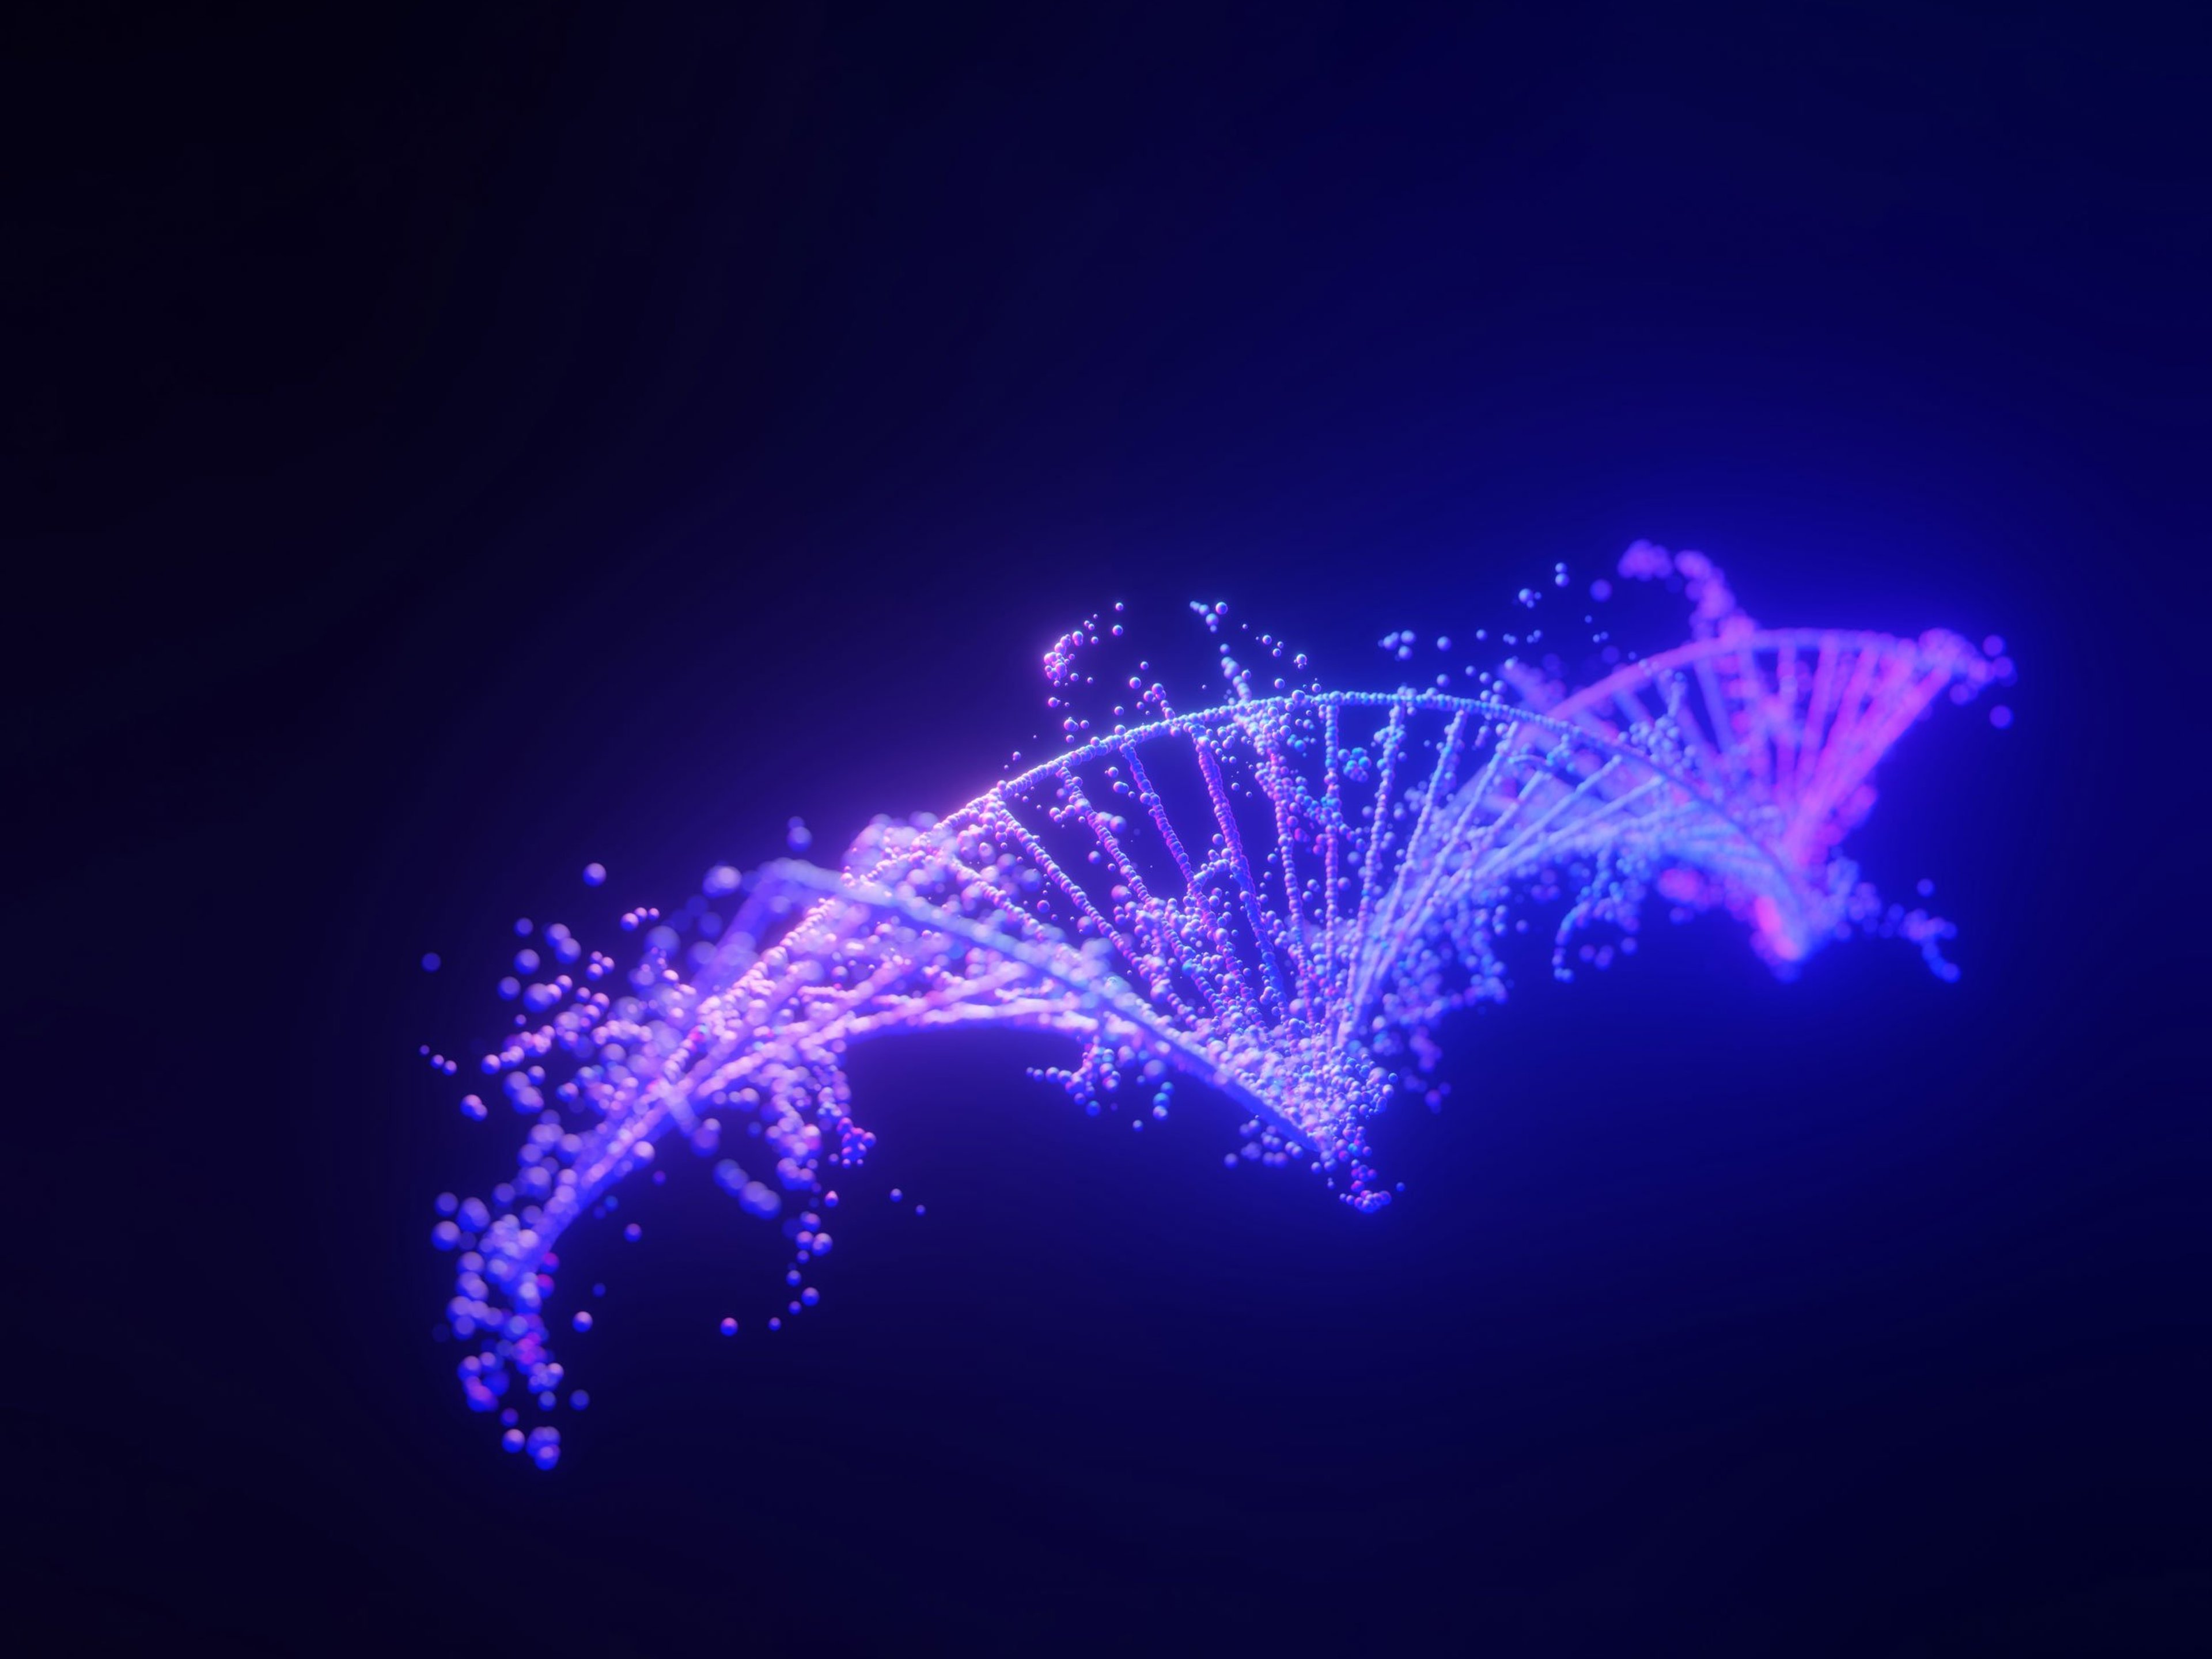 Abstract depiction of DNA against a dark blue background.